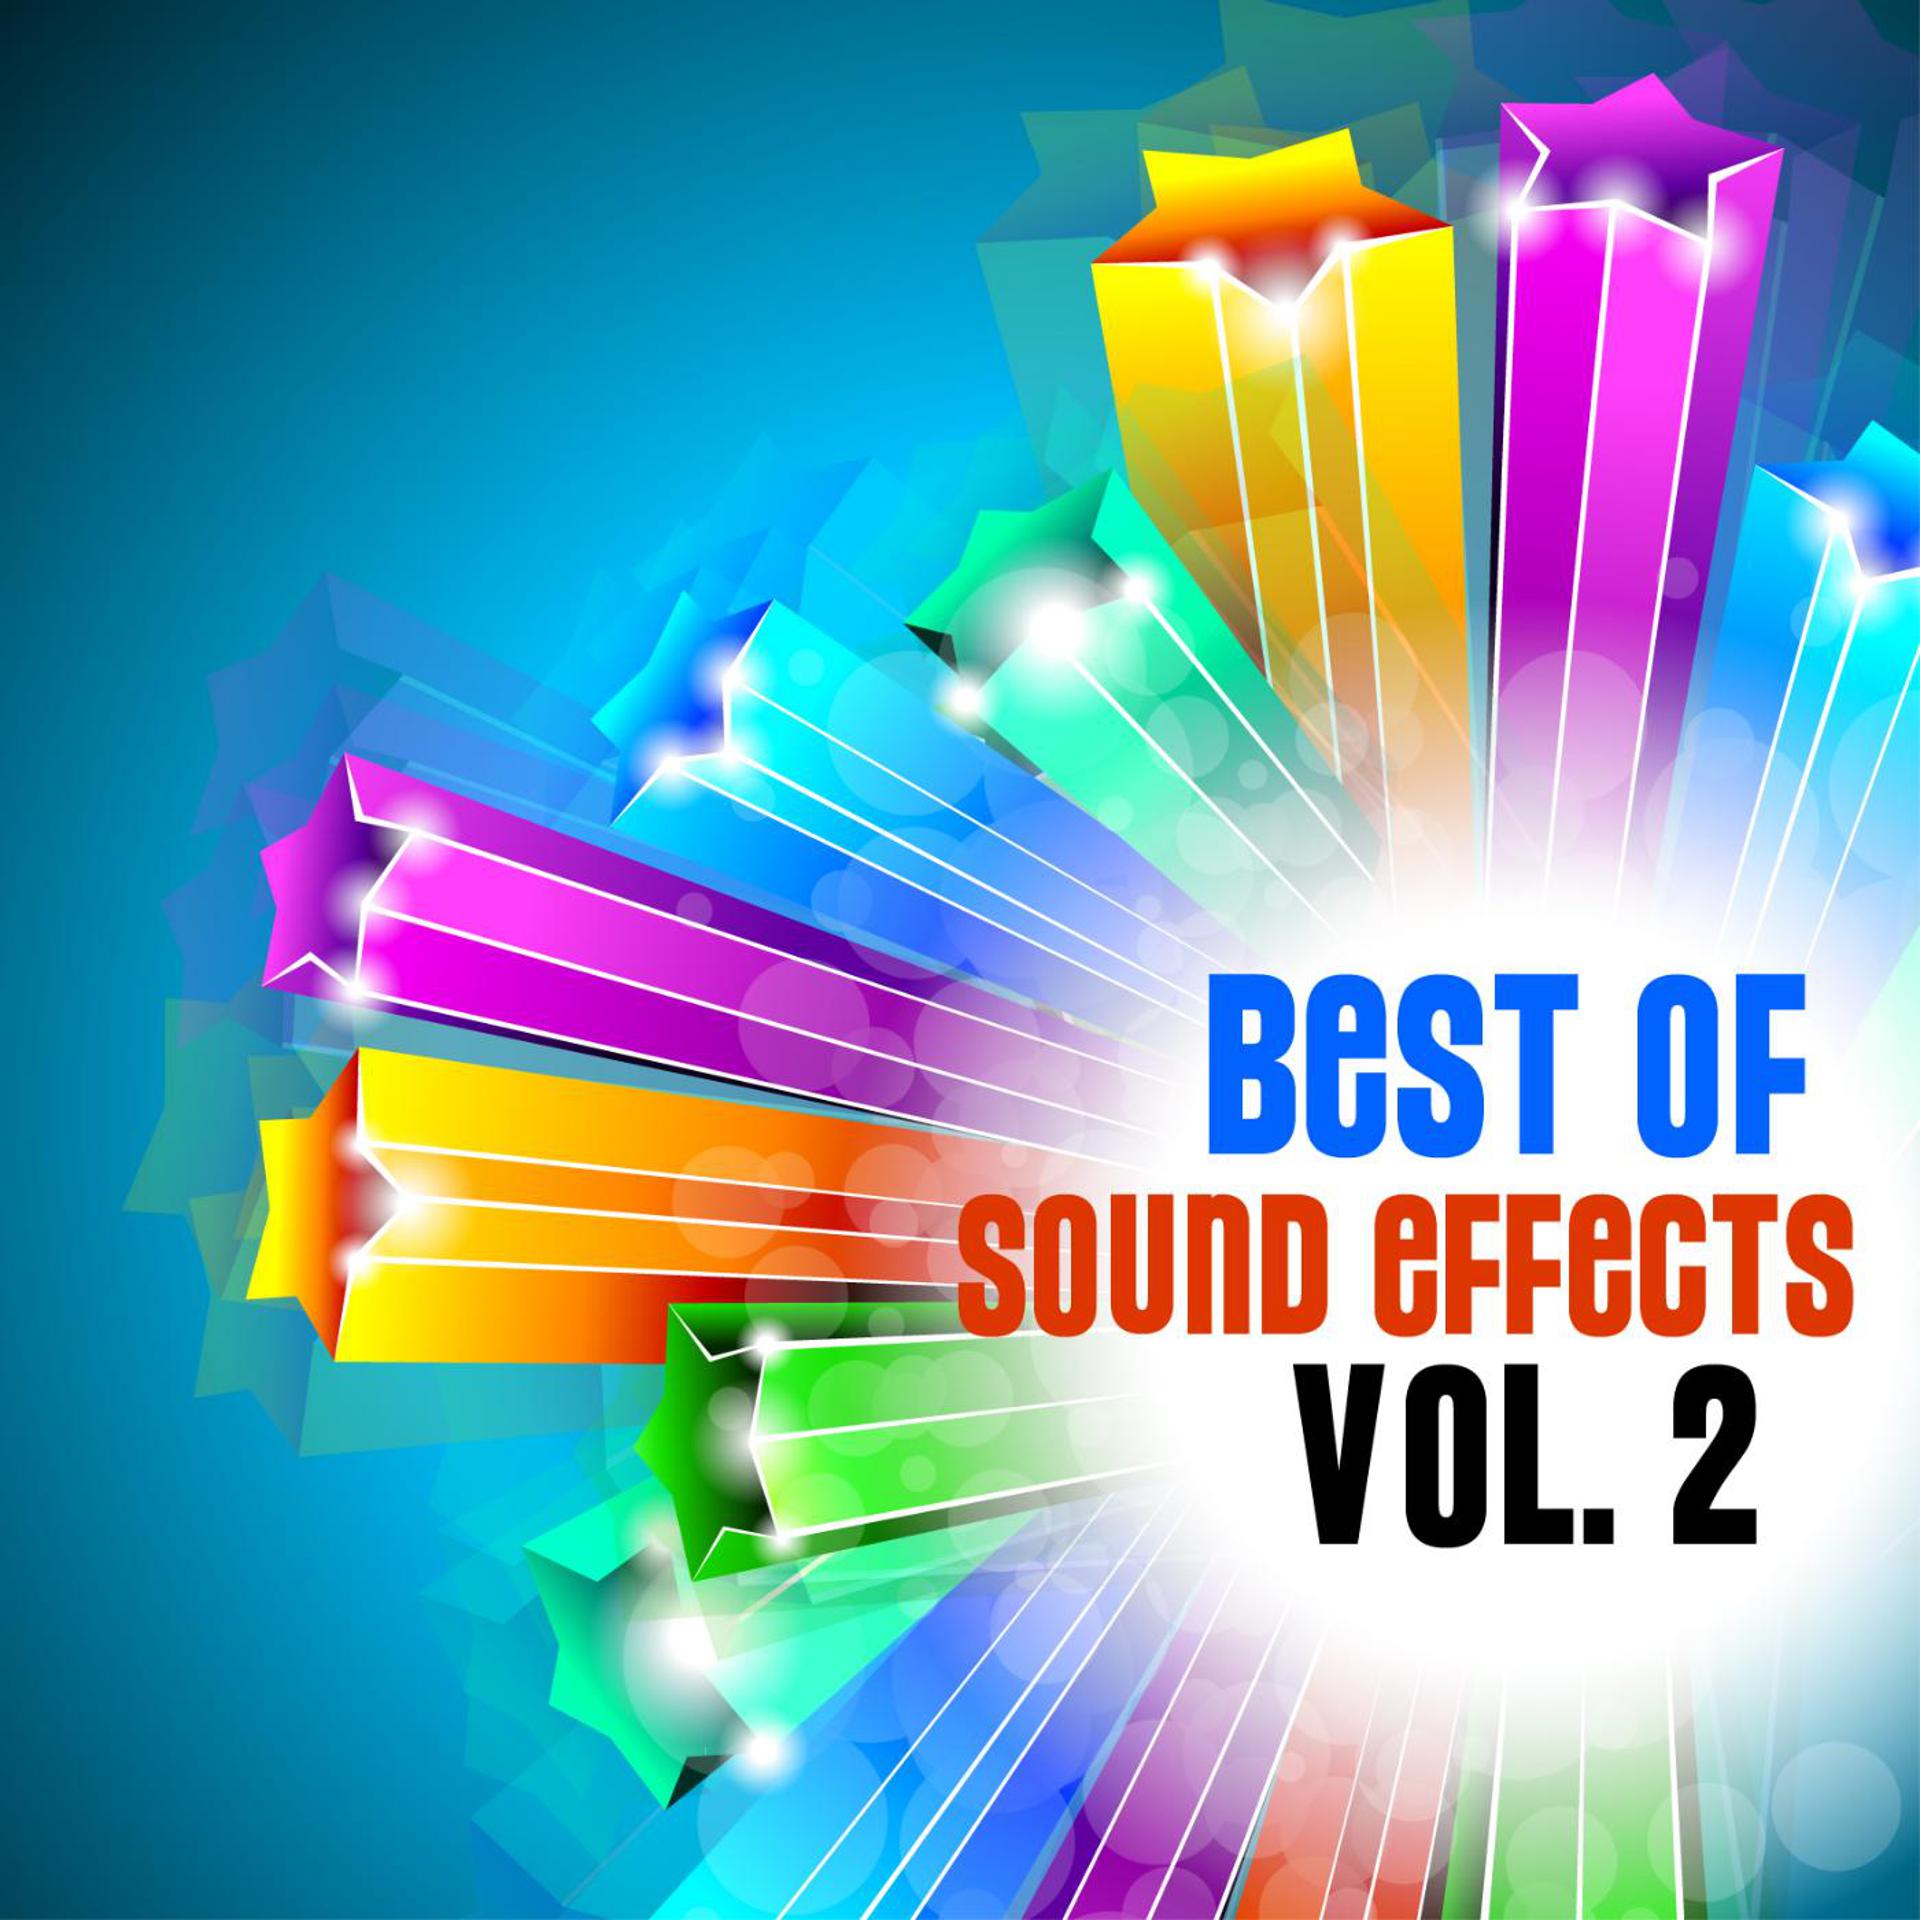 Постер альбома Best of Sound Effects. Royalty Free Sounds and Backing Loops for TV, Video, Youtube, DJ, Broadcasting and More, Vol. 2.